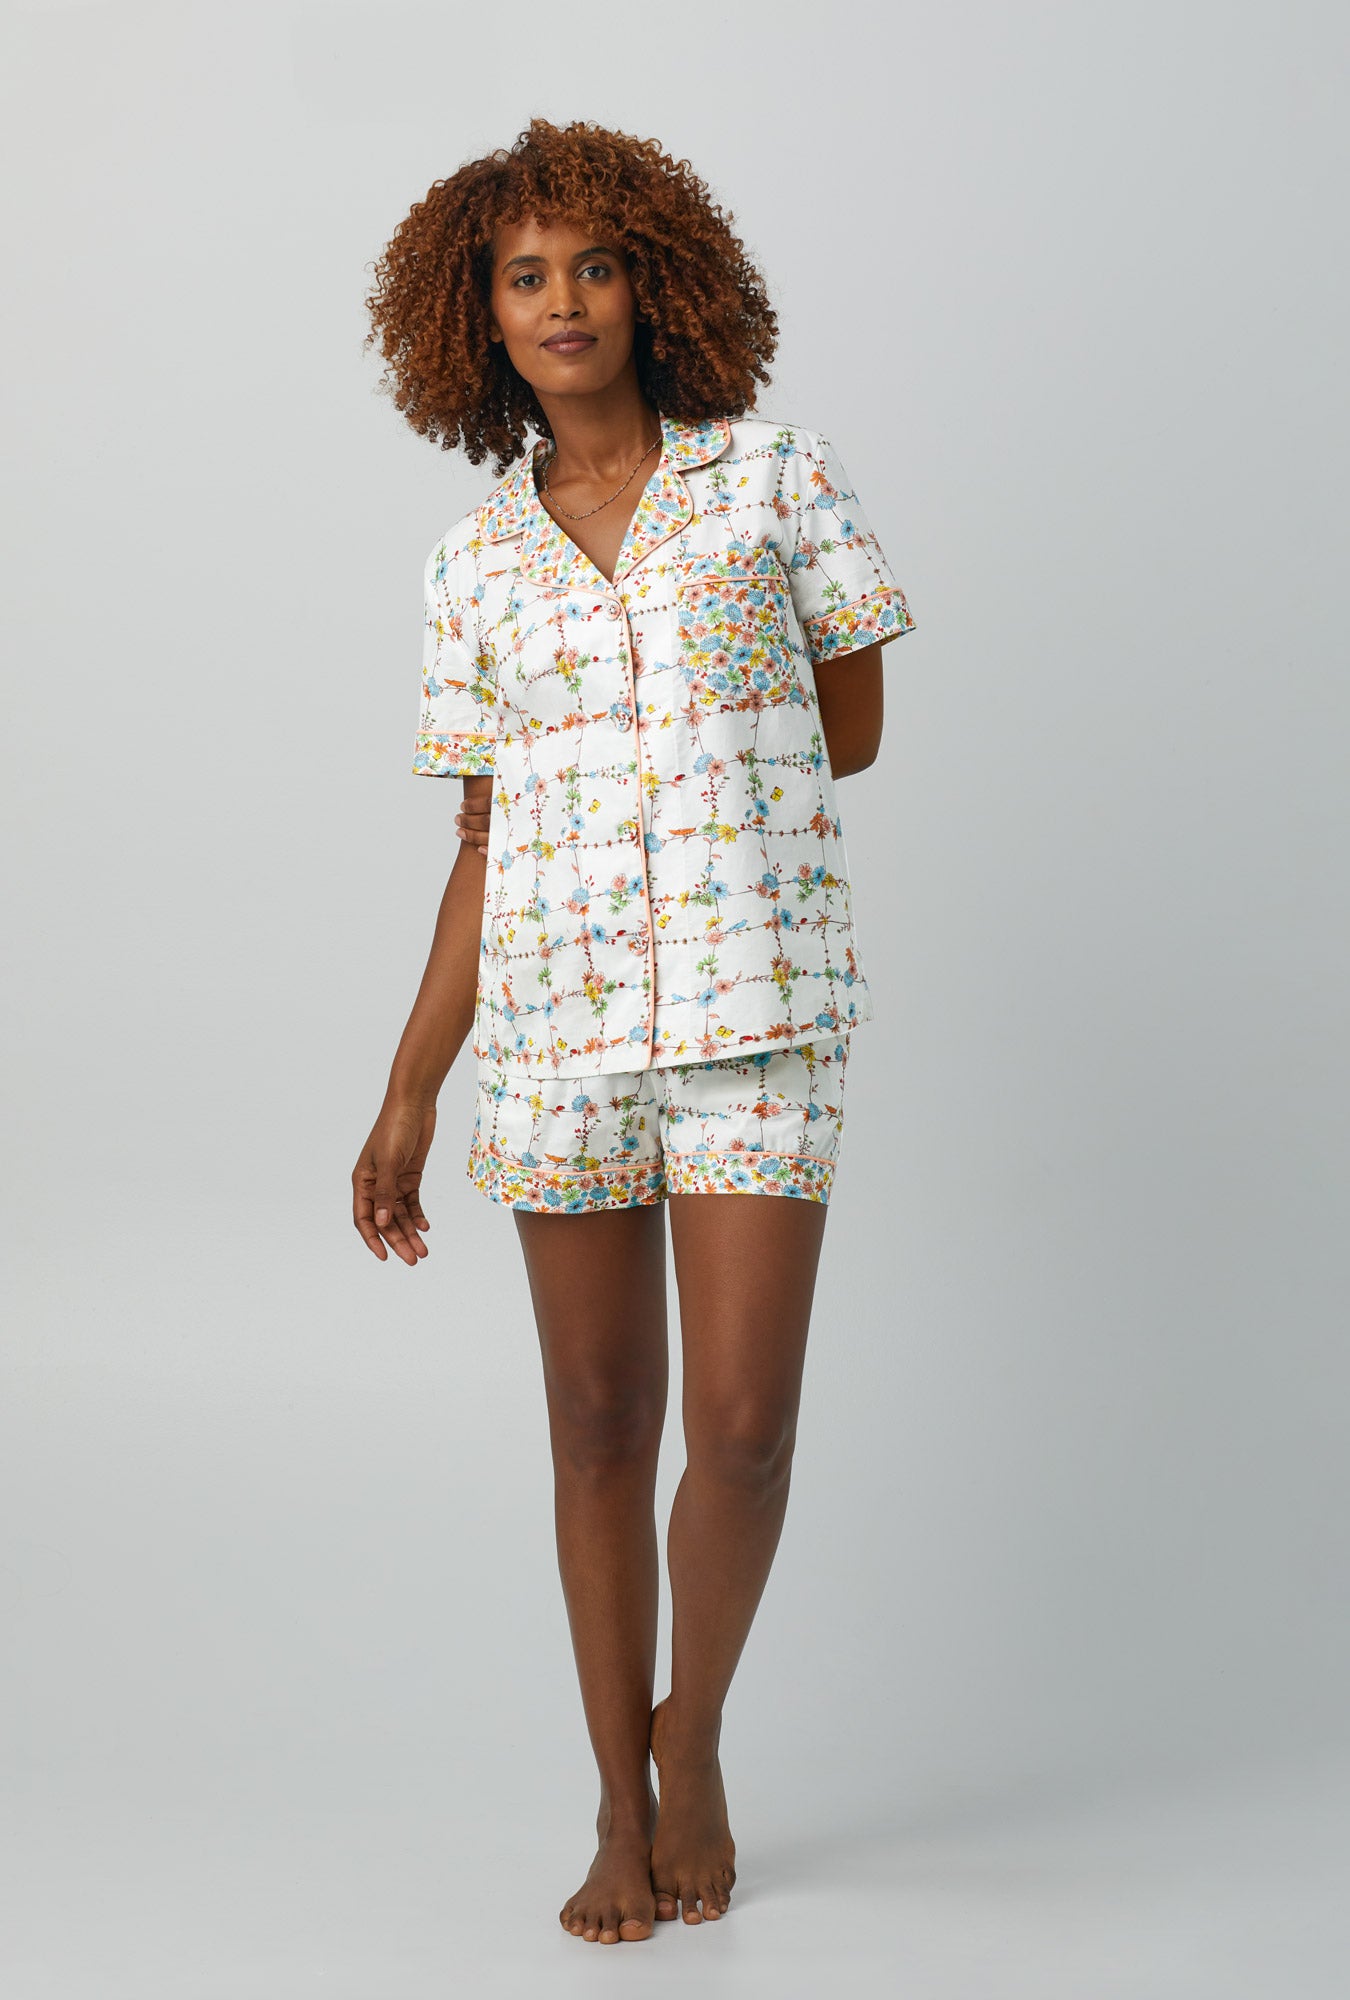 A lady wearing Short Sleeve Classic Shorty Woven Cotton Poplin PJ Set with spring vines print